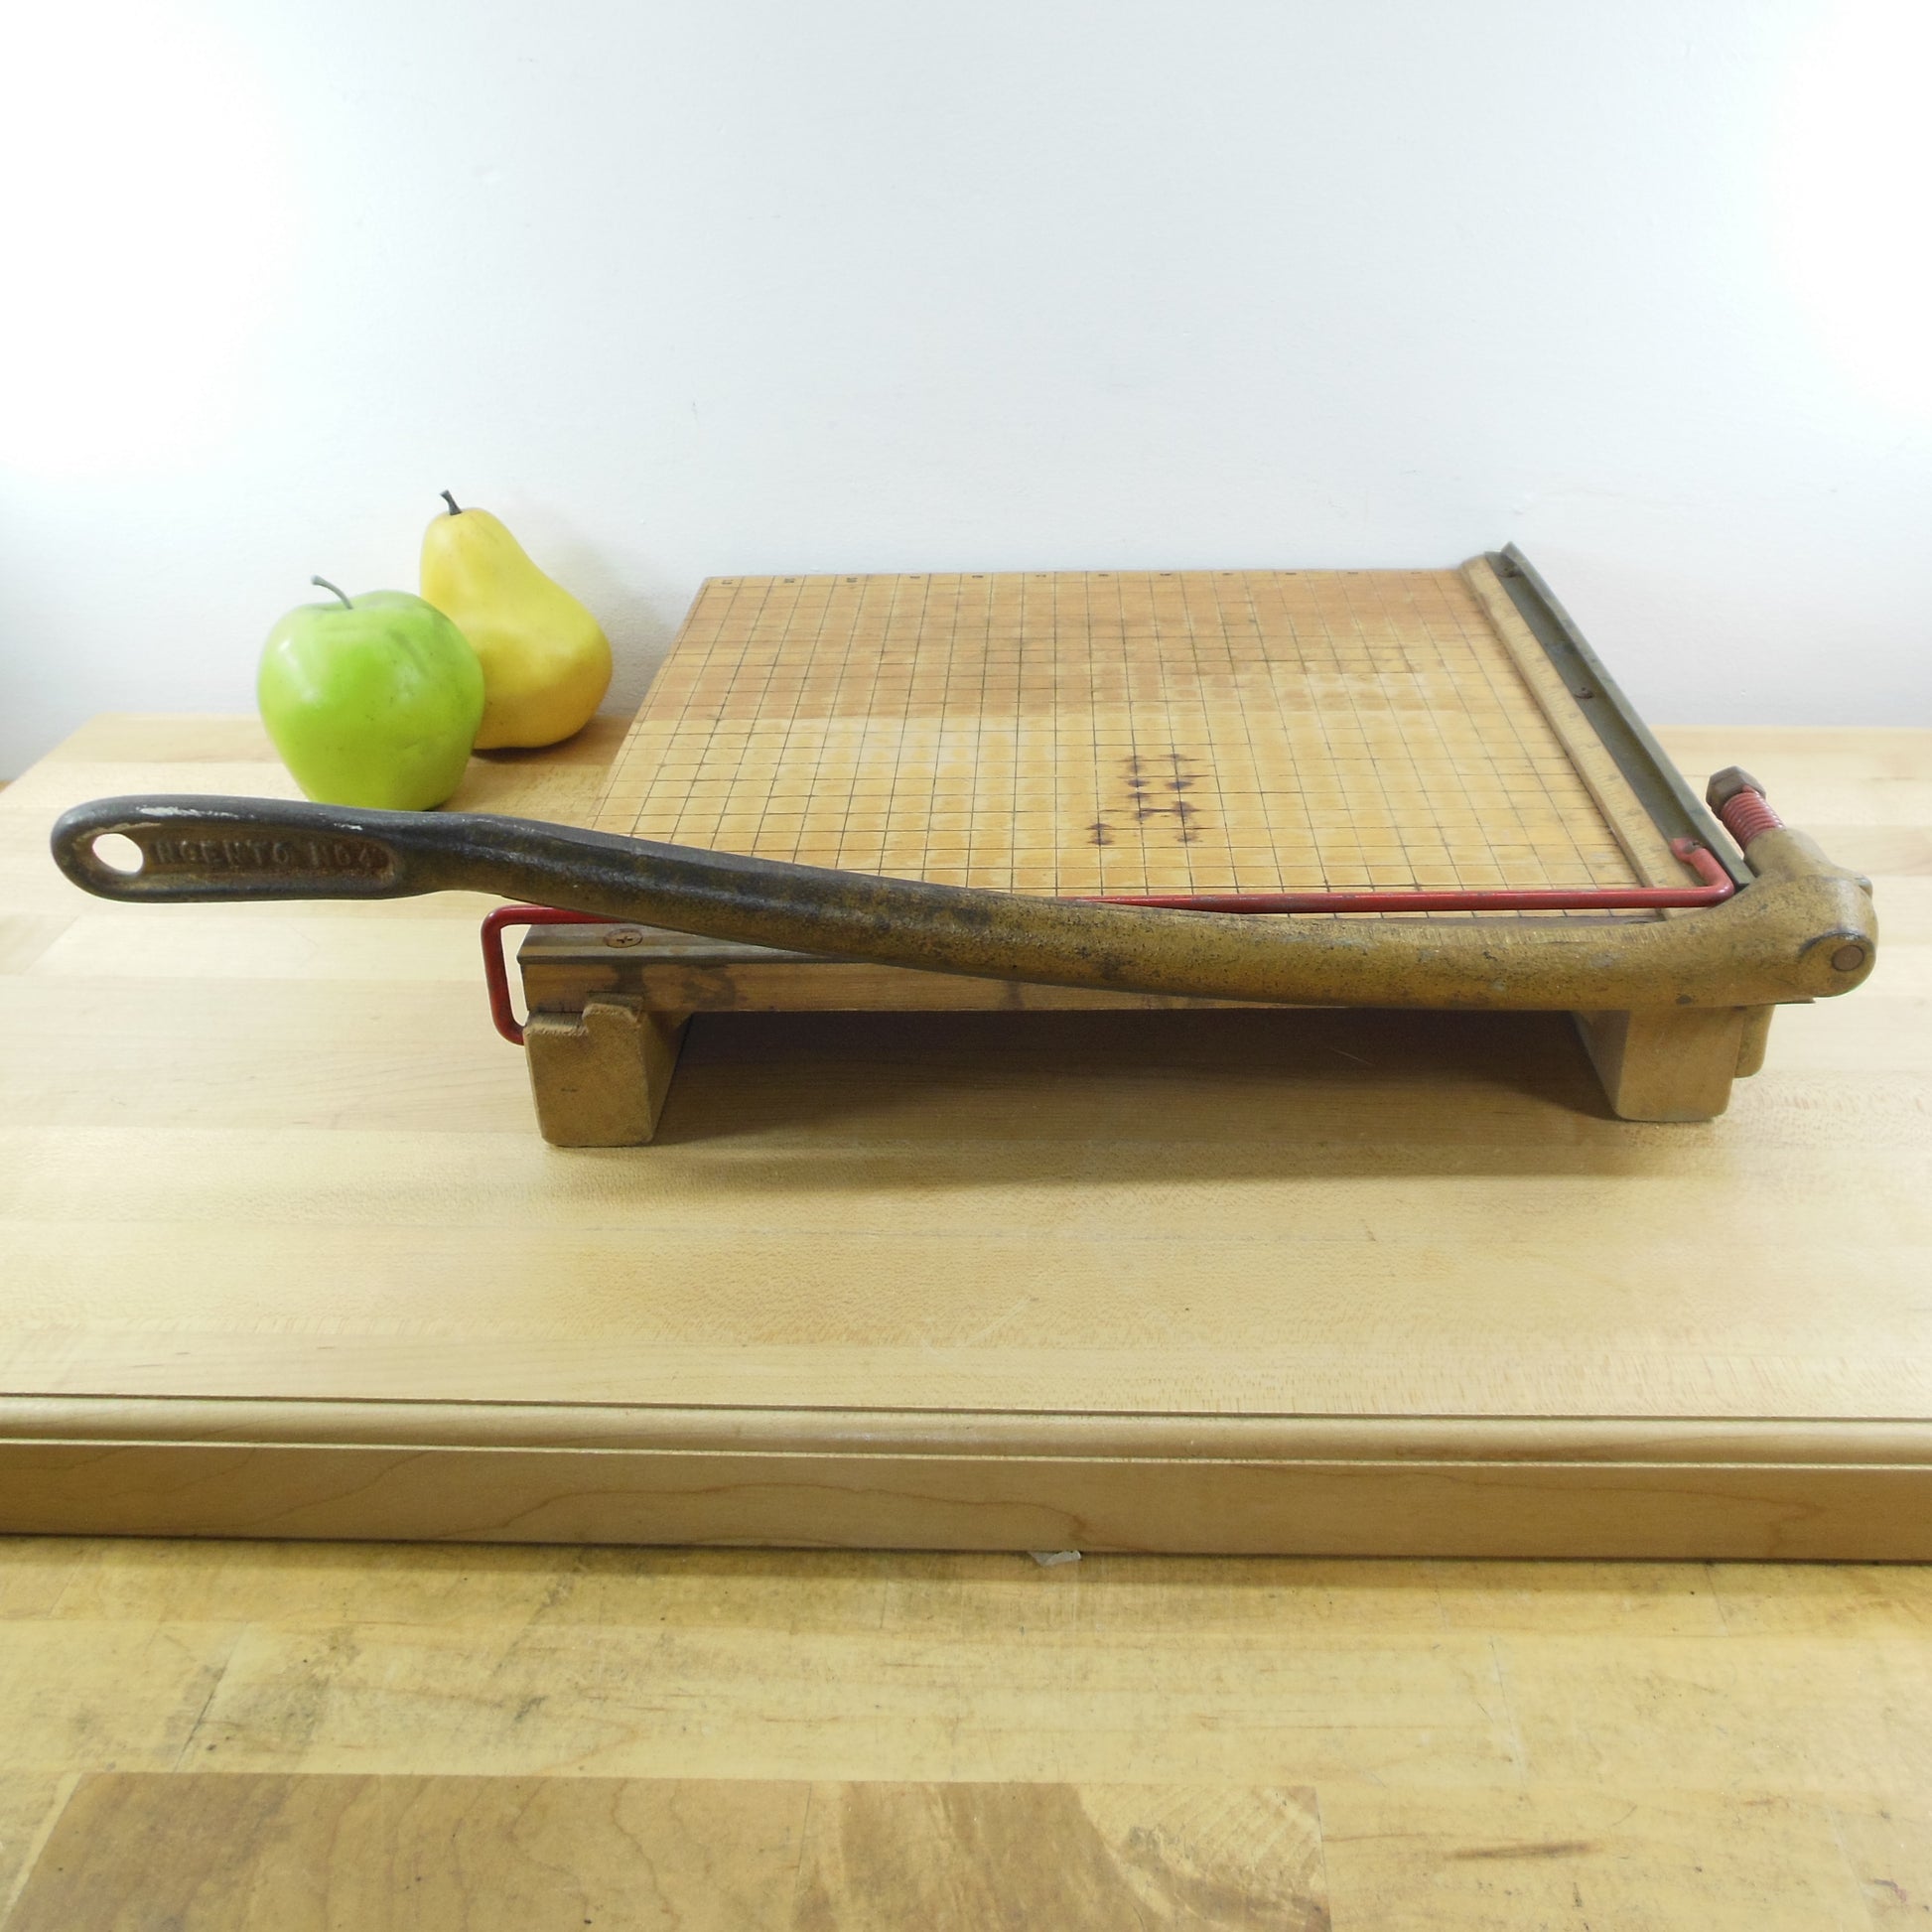 Vintage Paper Cutter Ingento No. 4 with Large Blade (c.1950s